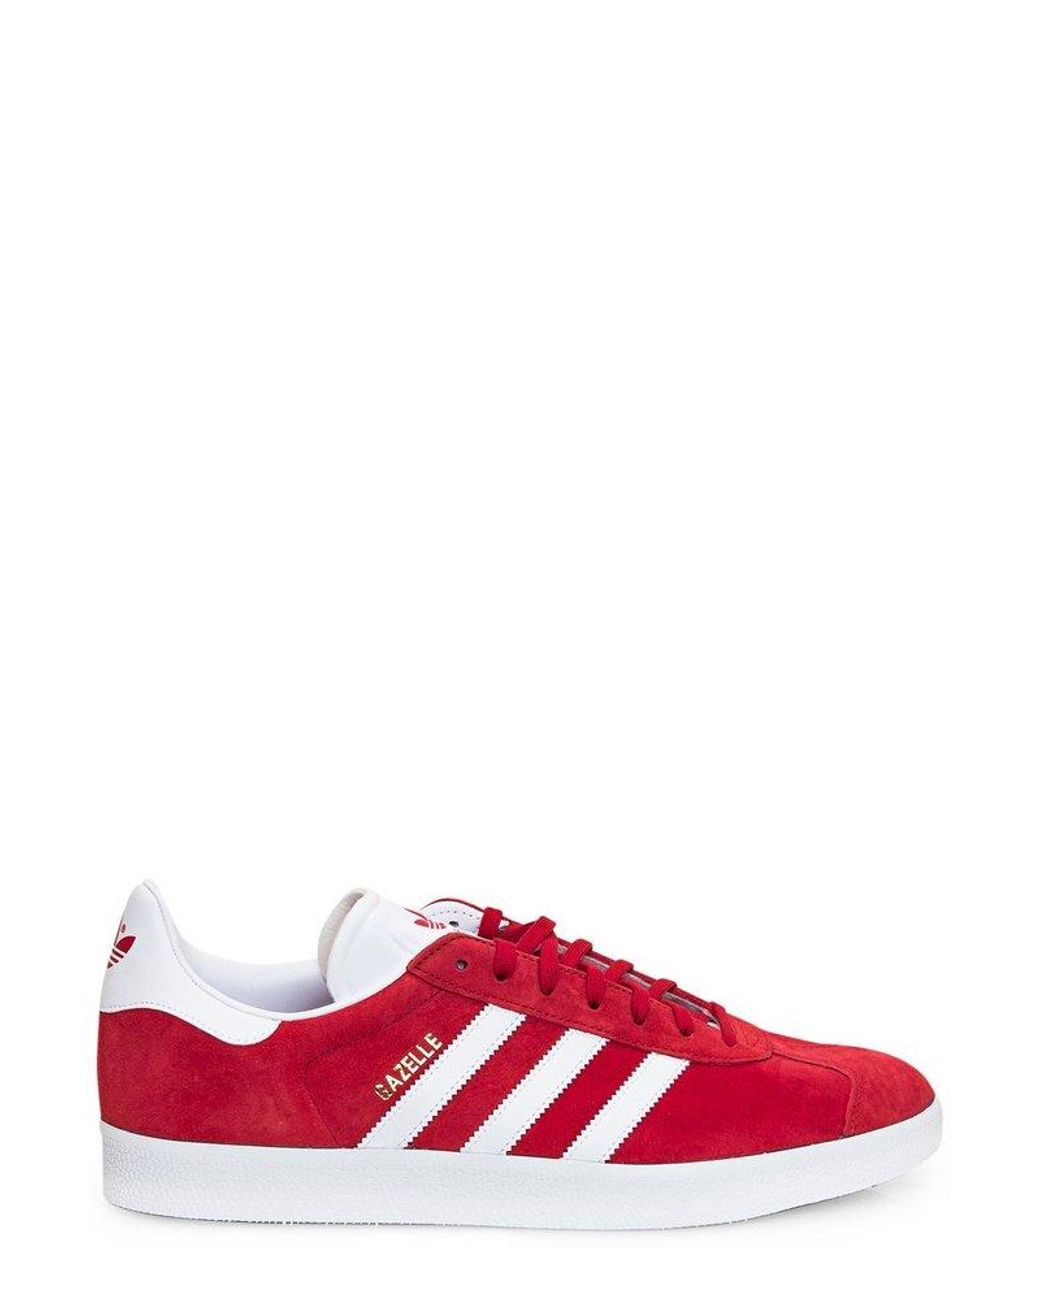 adidas Originals Lace Up Trainers in Red | Lyst Canada